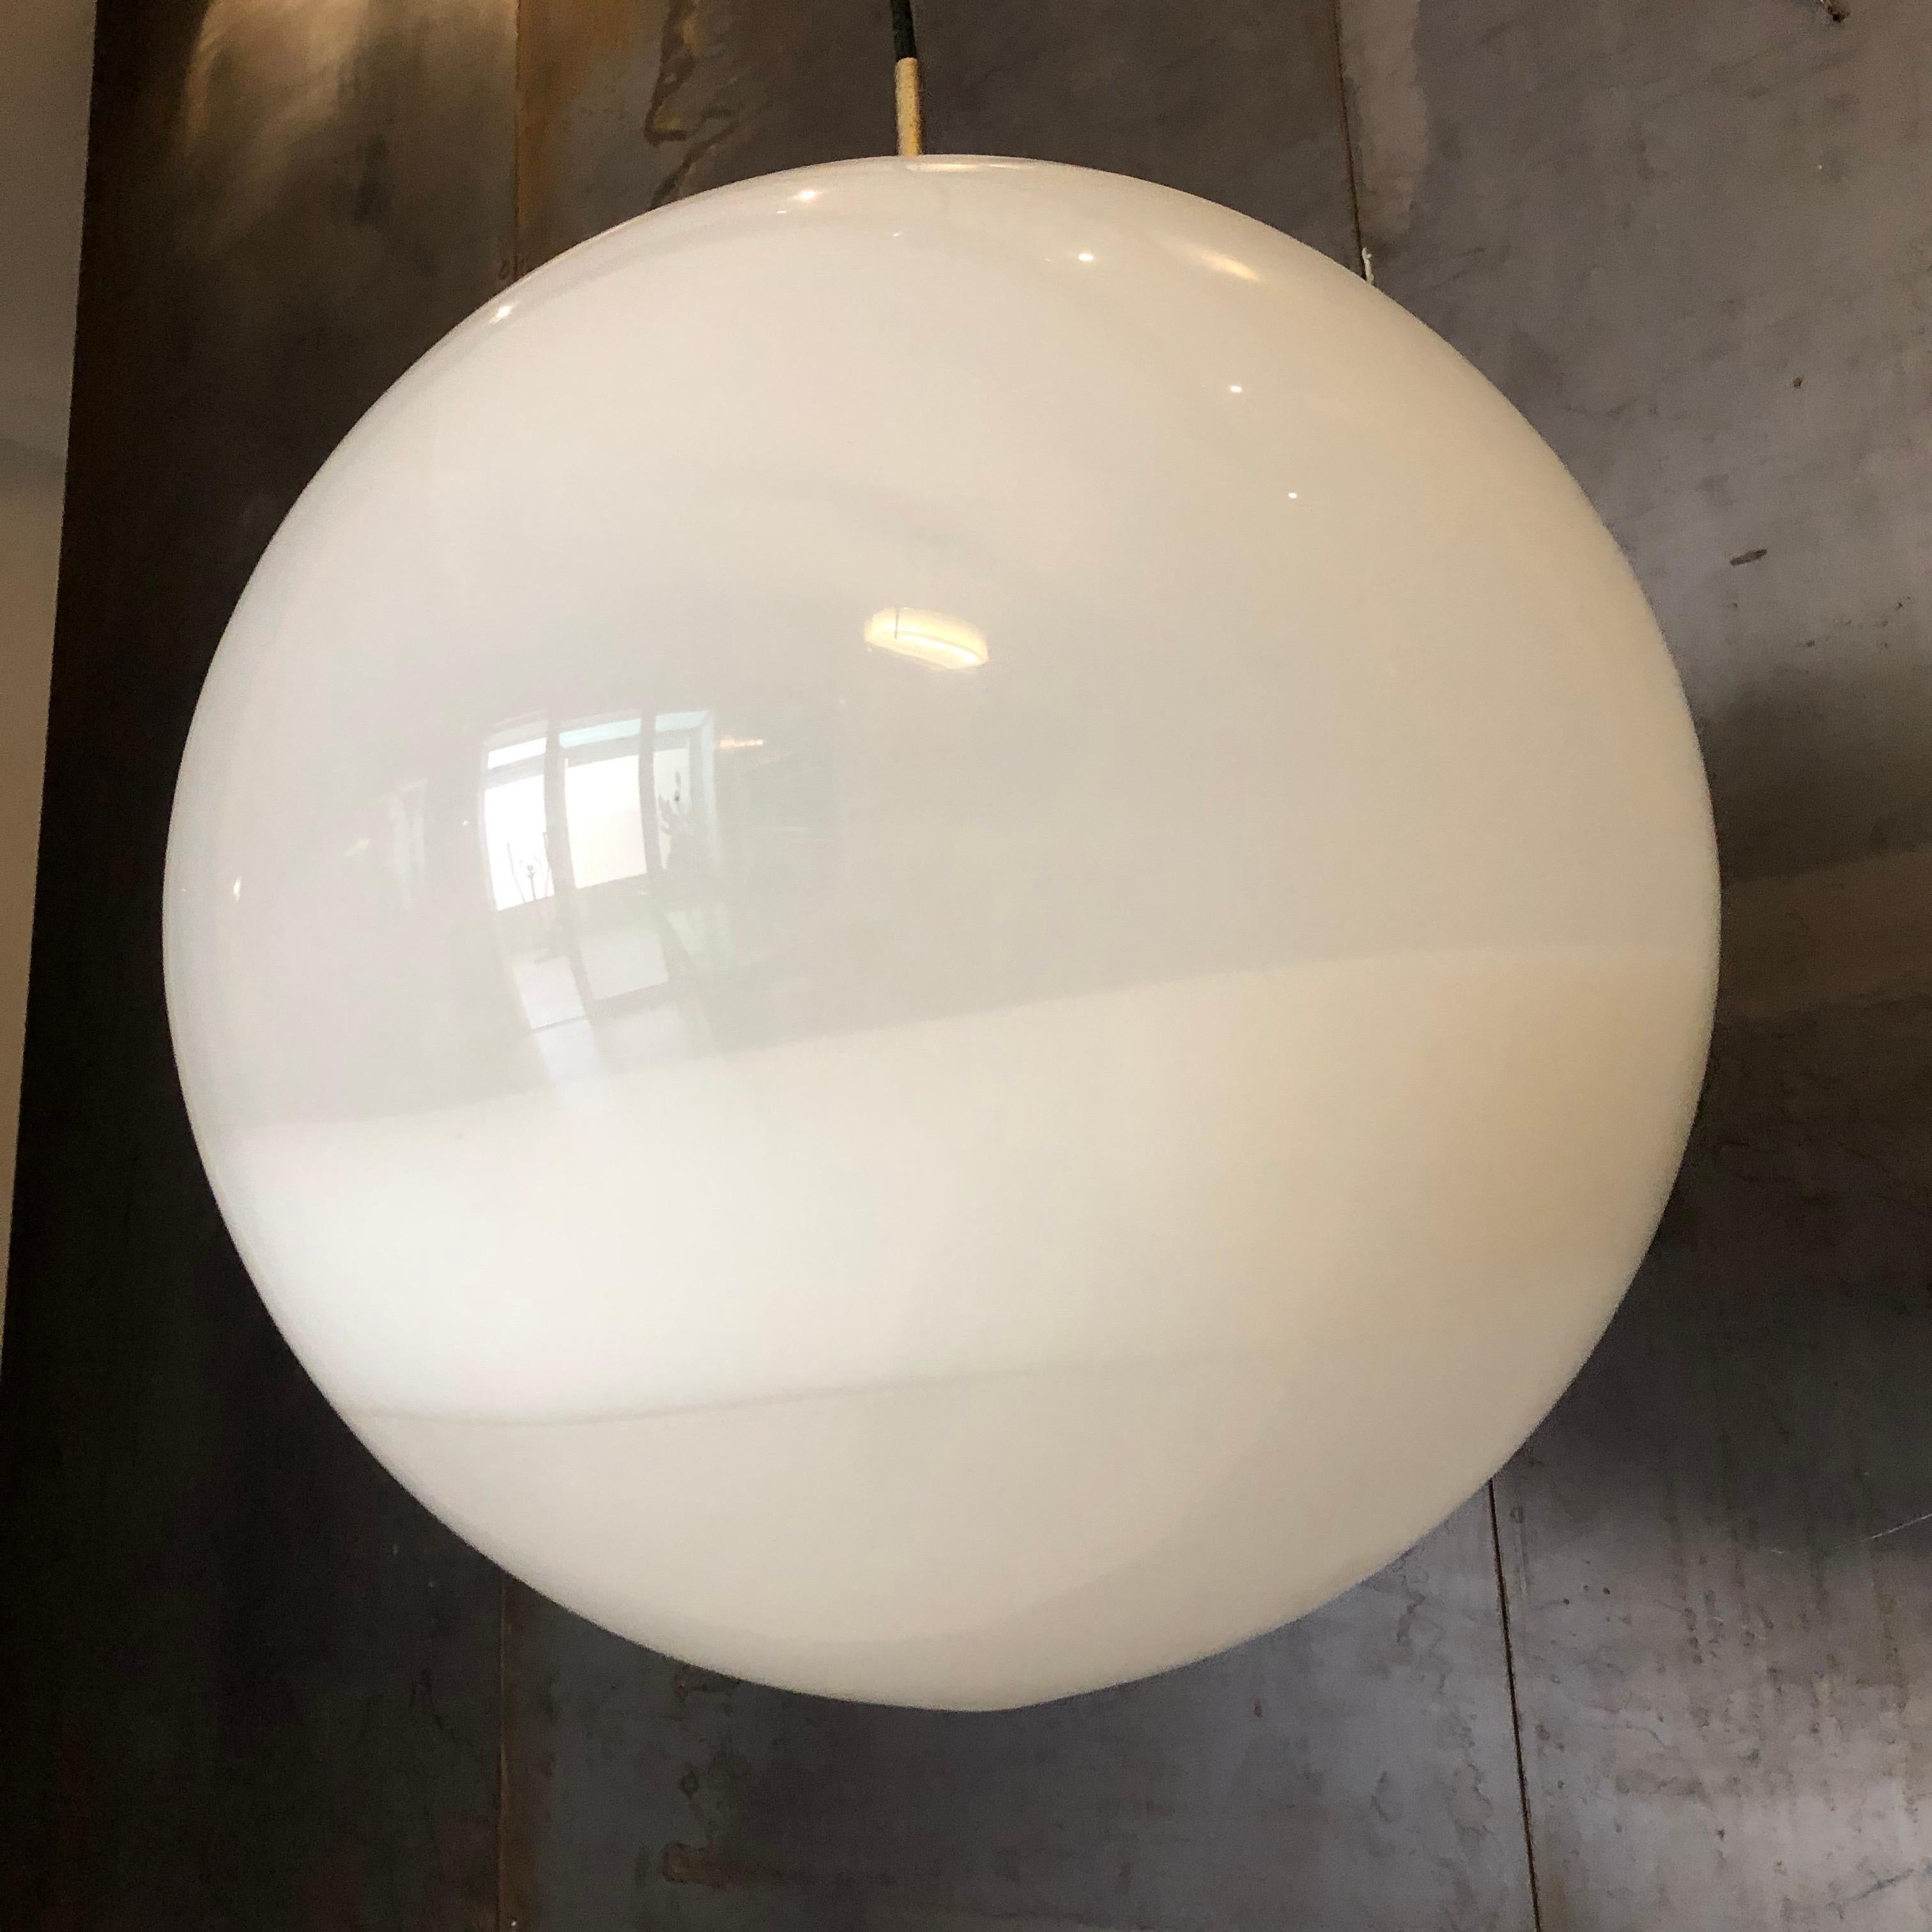 Large chrome and white Murano glass sphere by Mazzega and produced in Italy during the 1960s. Total height is 140 cm but can be reduced if necessary. The glass is in perfect condition with no cracks or chips.